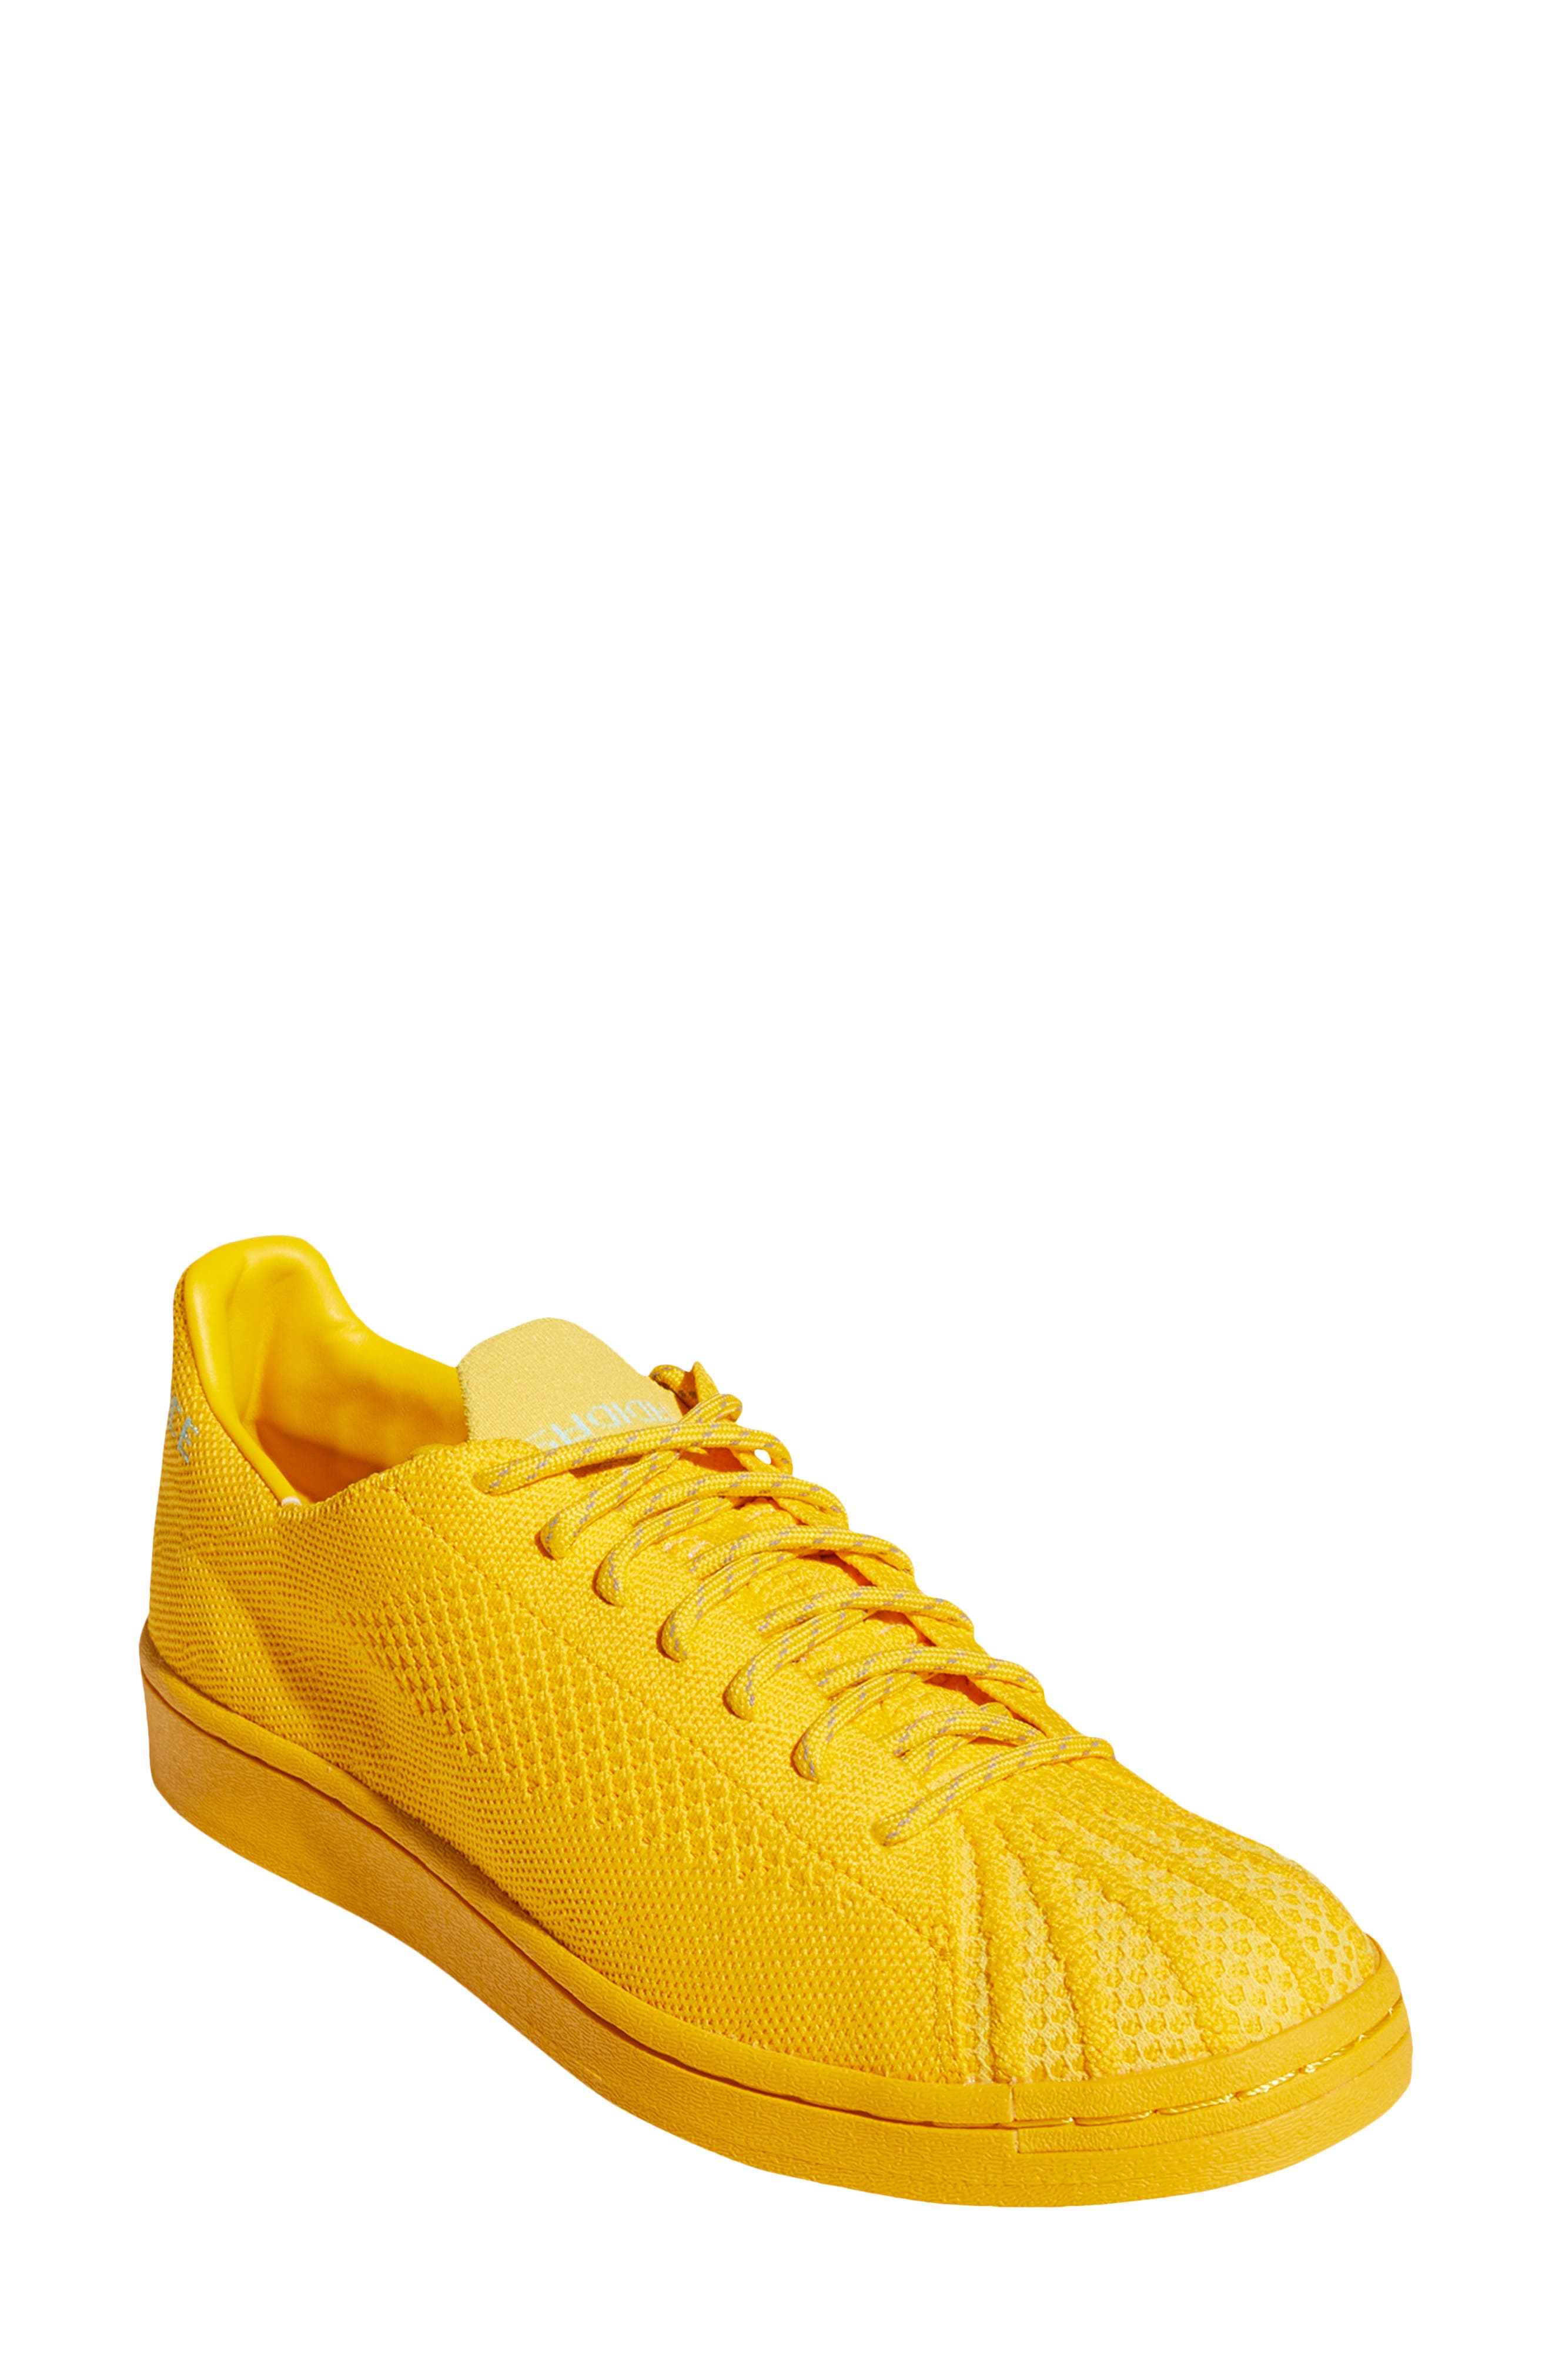 mens yellow athletic shoes